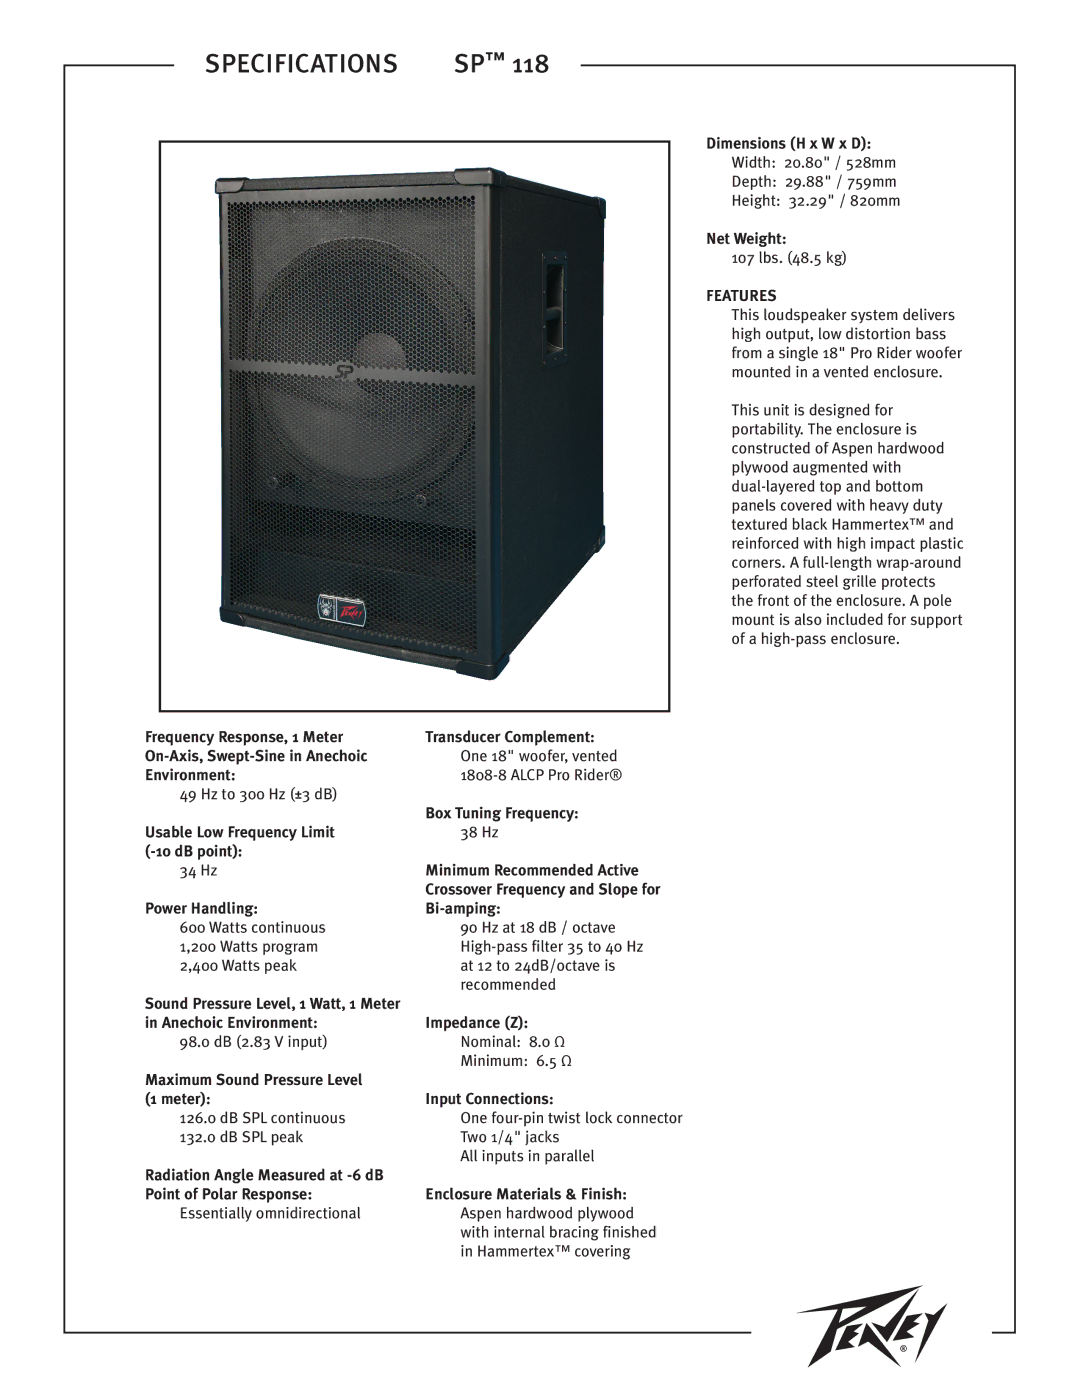 Peavey SP 118 specifications Dimensions H x W x D, Net Weight, Usable Low Frequency Limit -10 dB point, Power Handling 